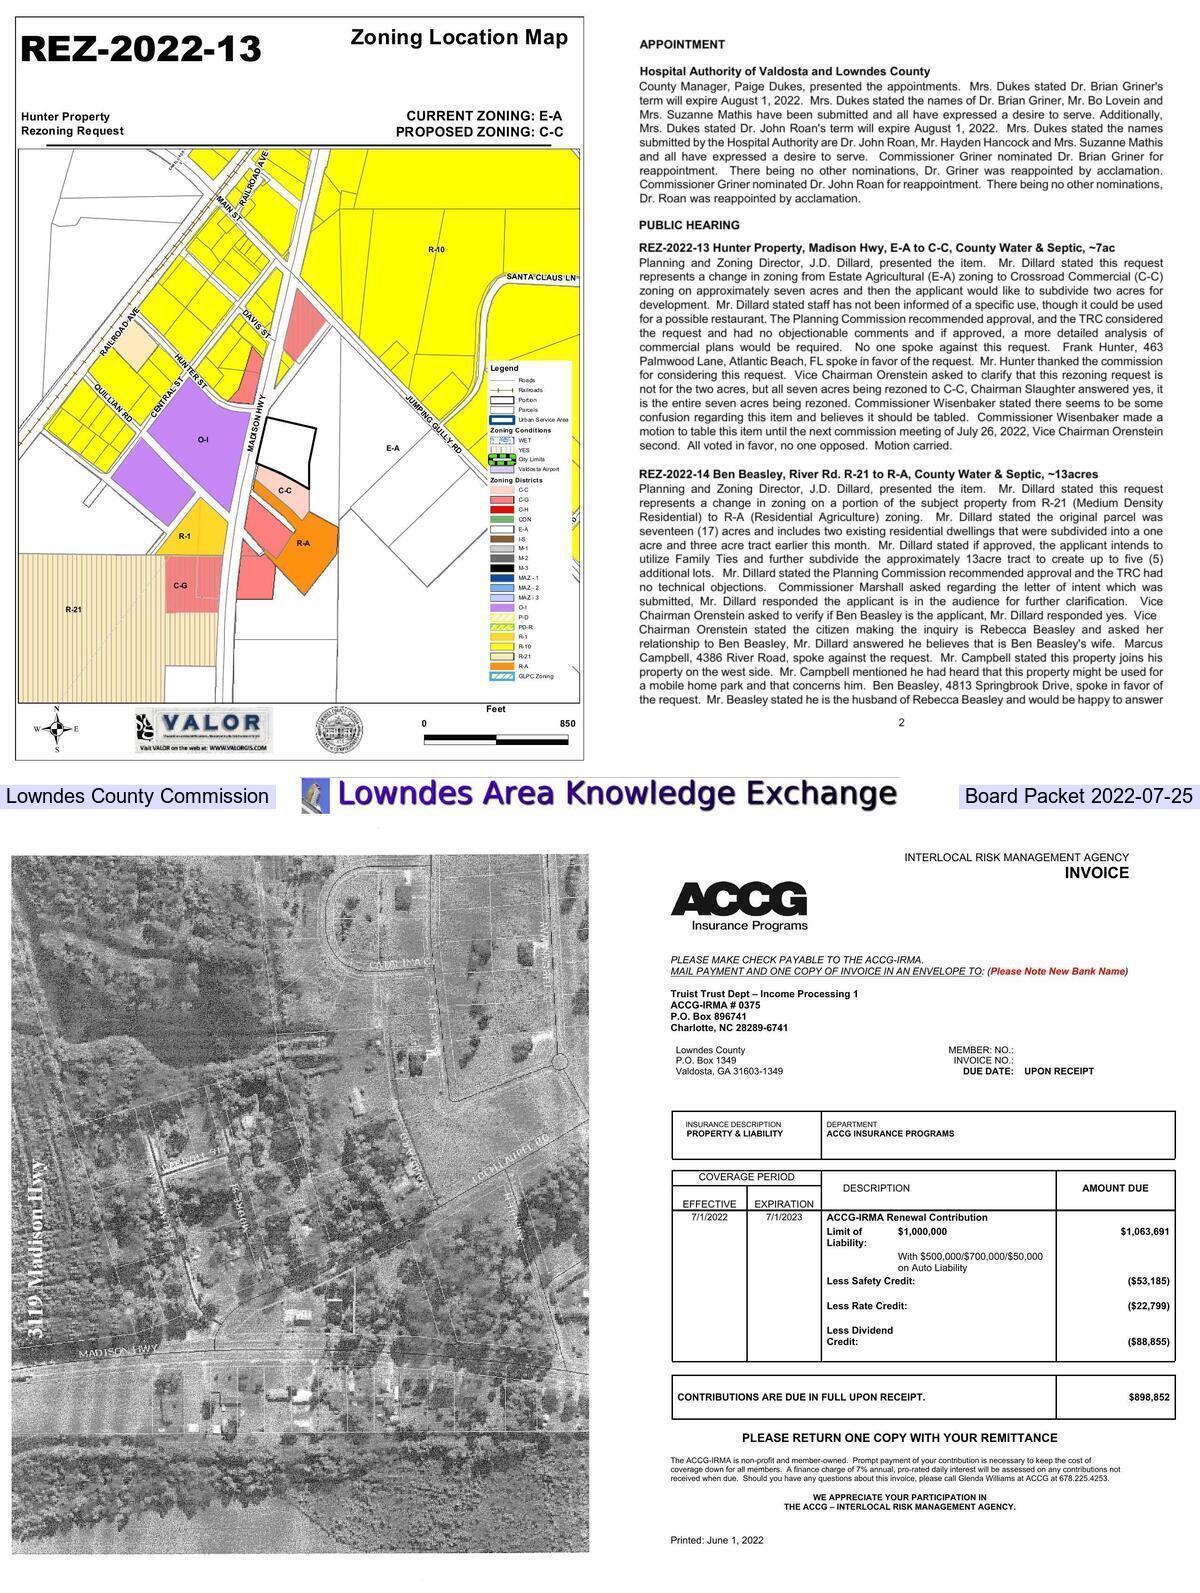 [Rezoning and insurance]